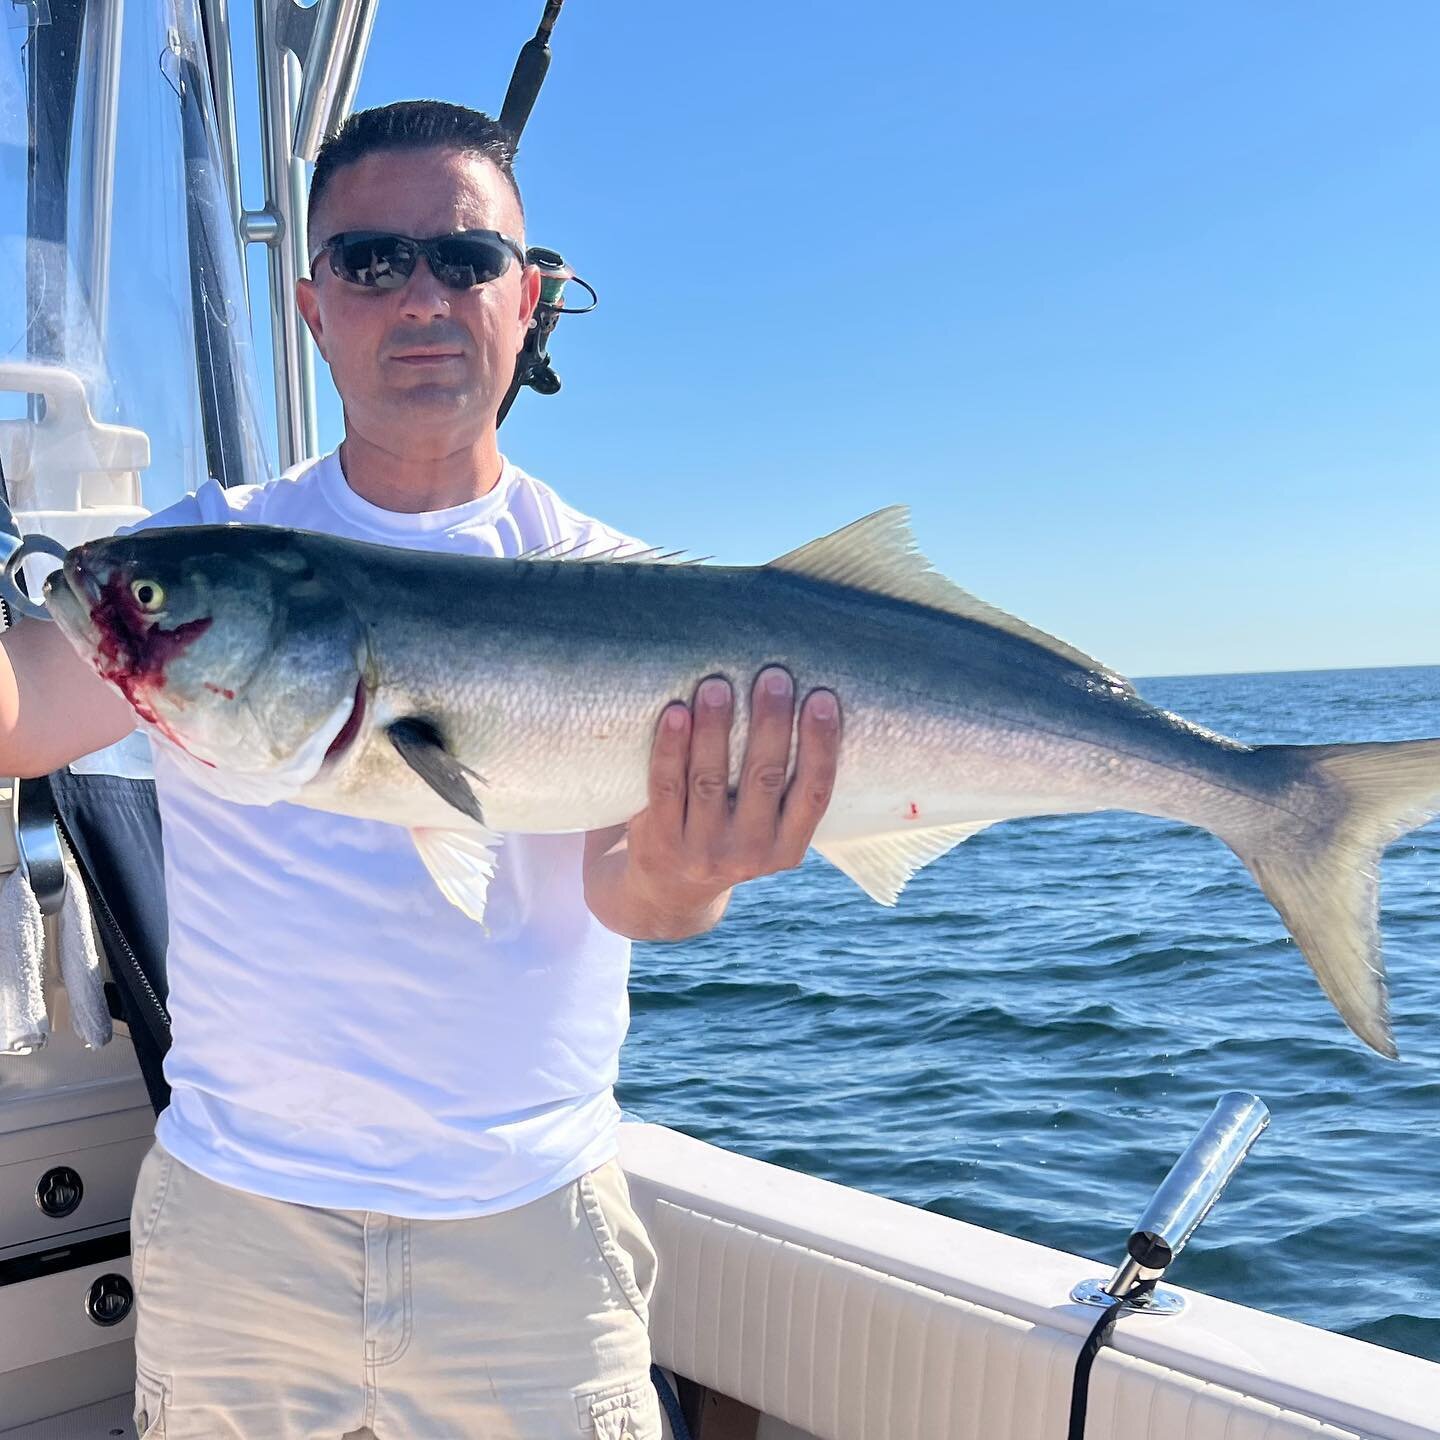 &ldquo;These little town Blues.&rdquo;&hellip;#stripedbass bite has cooled off quite a bit. But great #bluefish bite this morning. #bostonharbor still producing quite a few fish.

#lifebyz 
#newenglandfishing 
#rapalalures 
#gradywhiteboats